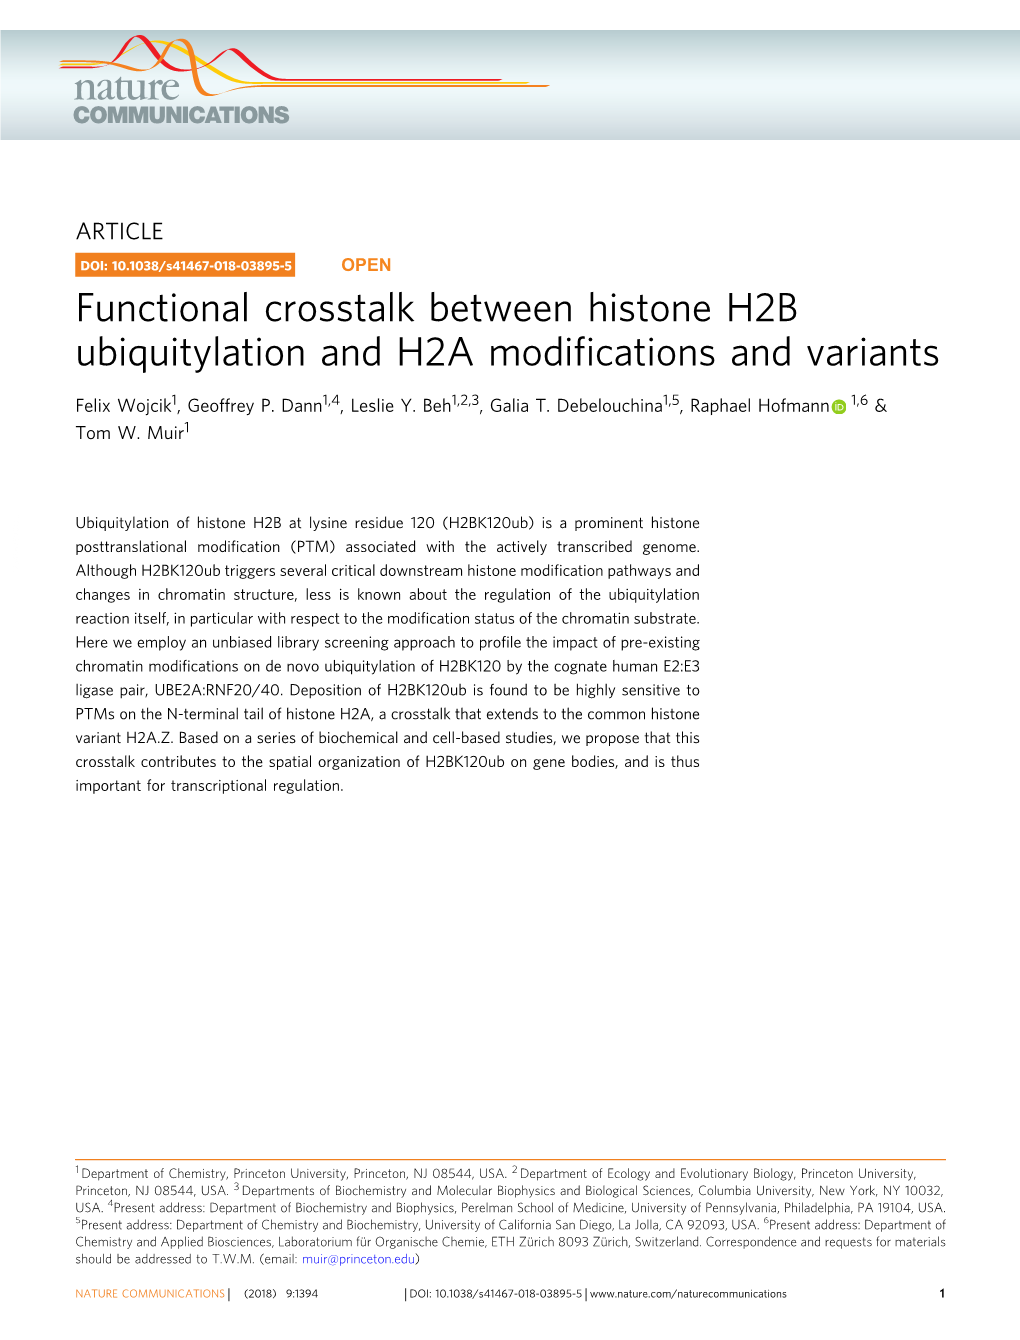 Functional Crosstalk Between Histone H2B Ubiquitylation and H2A Modifications and Variants